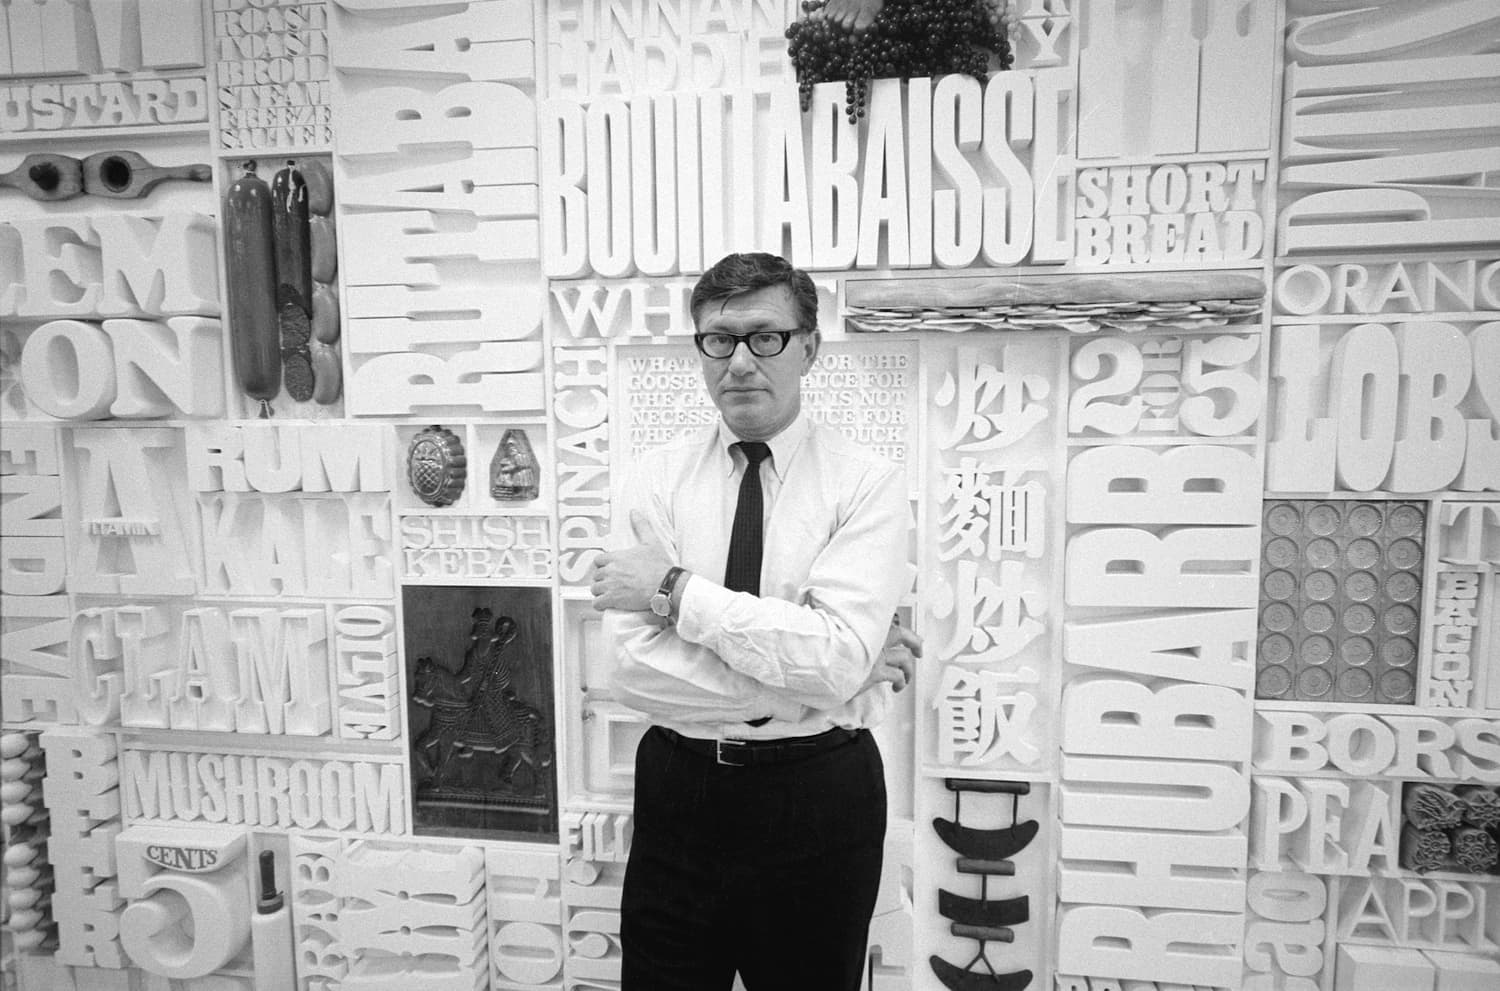 Lou Dorfsman in front of the finished wall, circa 1966